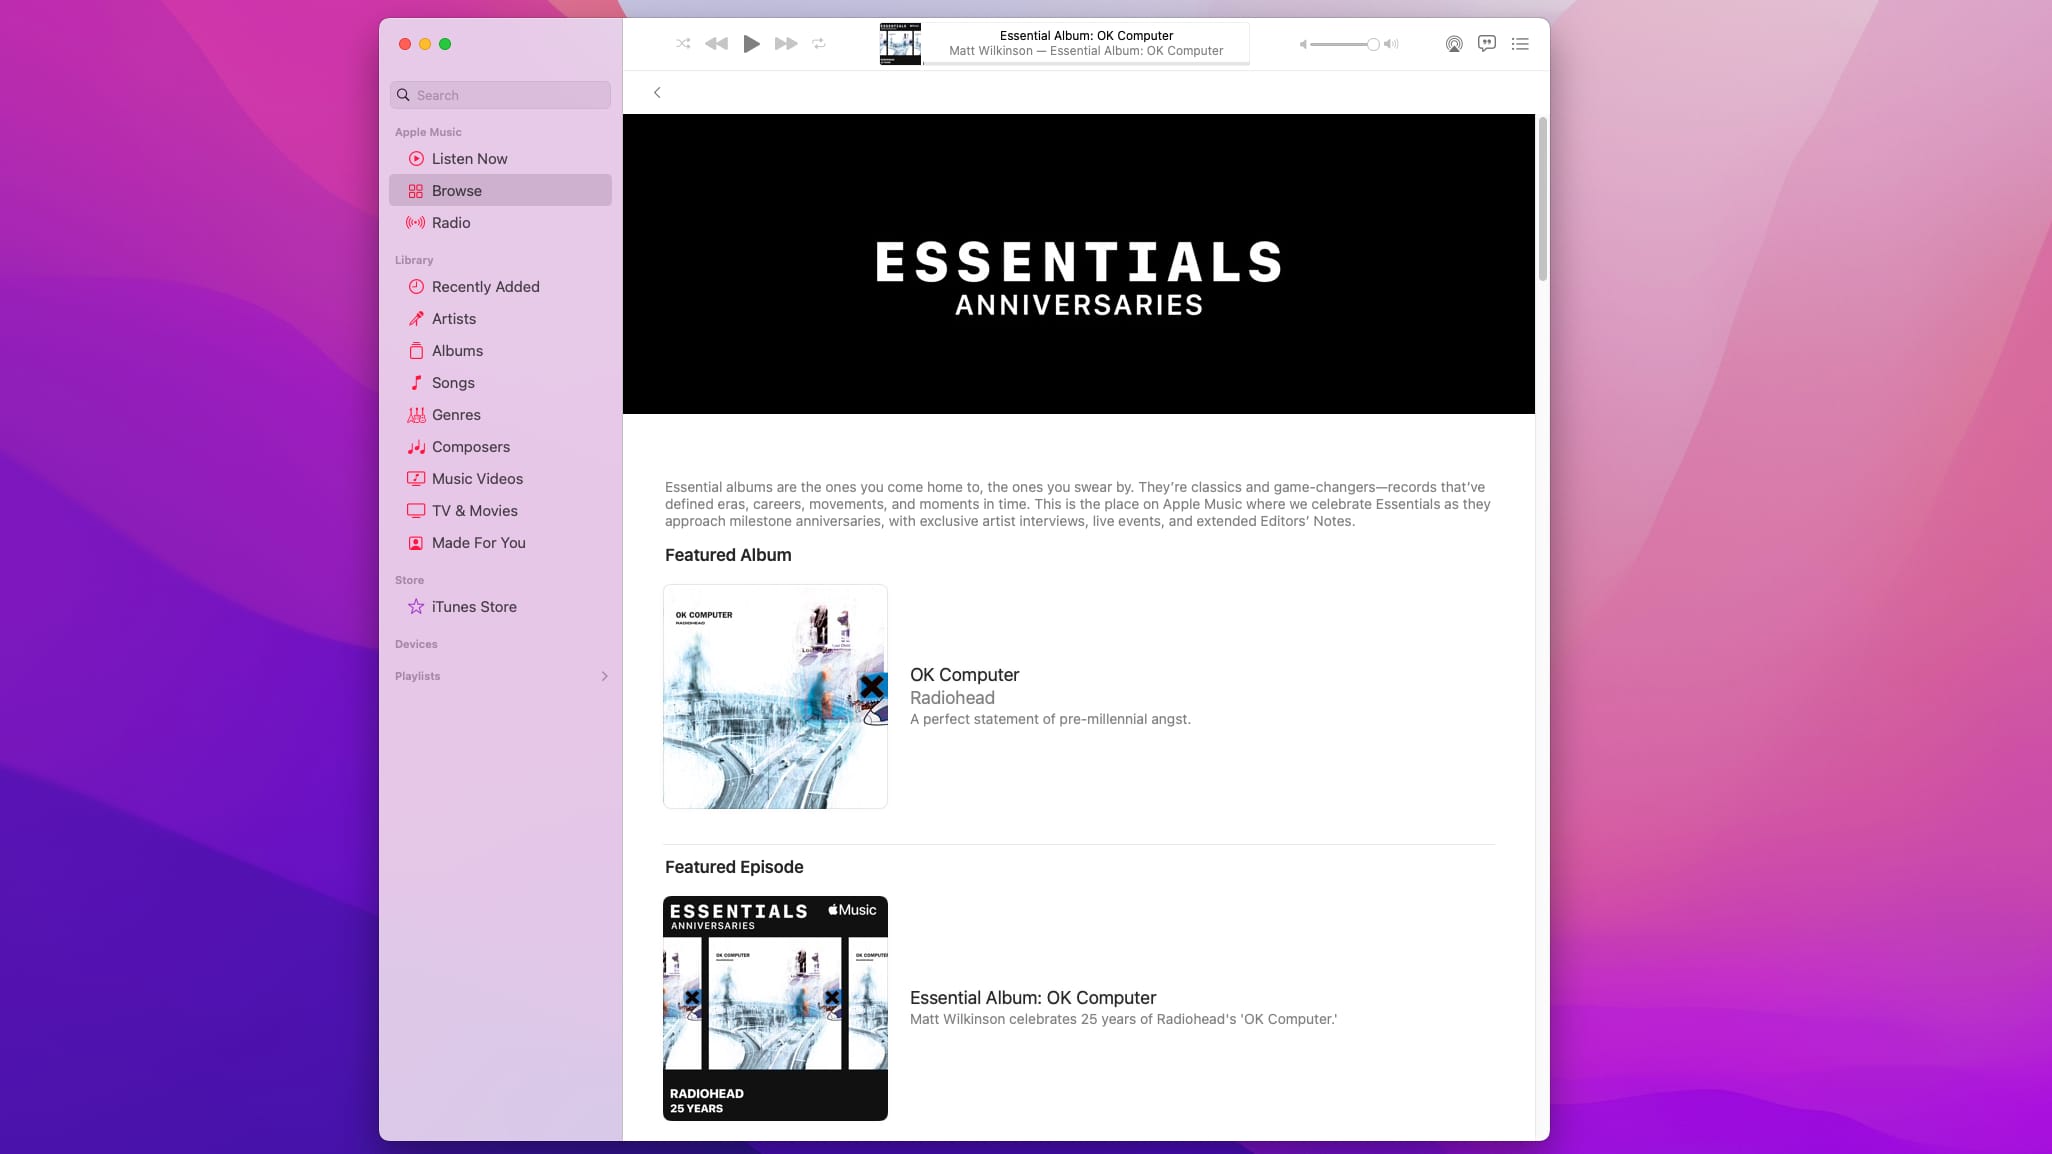 The Essential Anniversaries list that showcases classic albums is shown in this screenshot taken from Apple's Music app on macOS